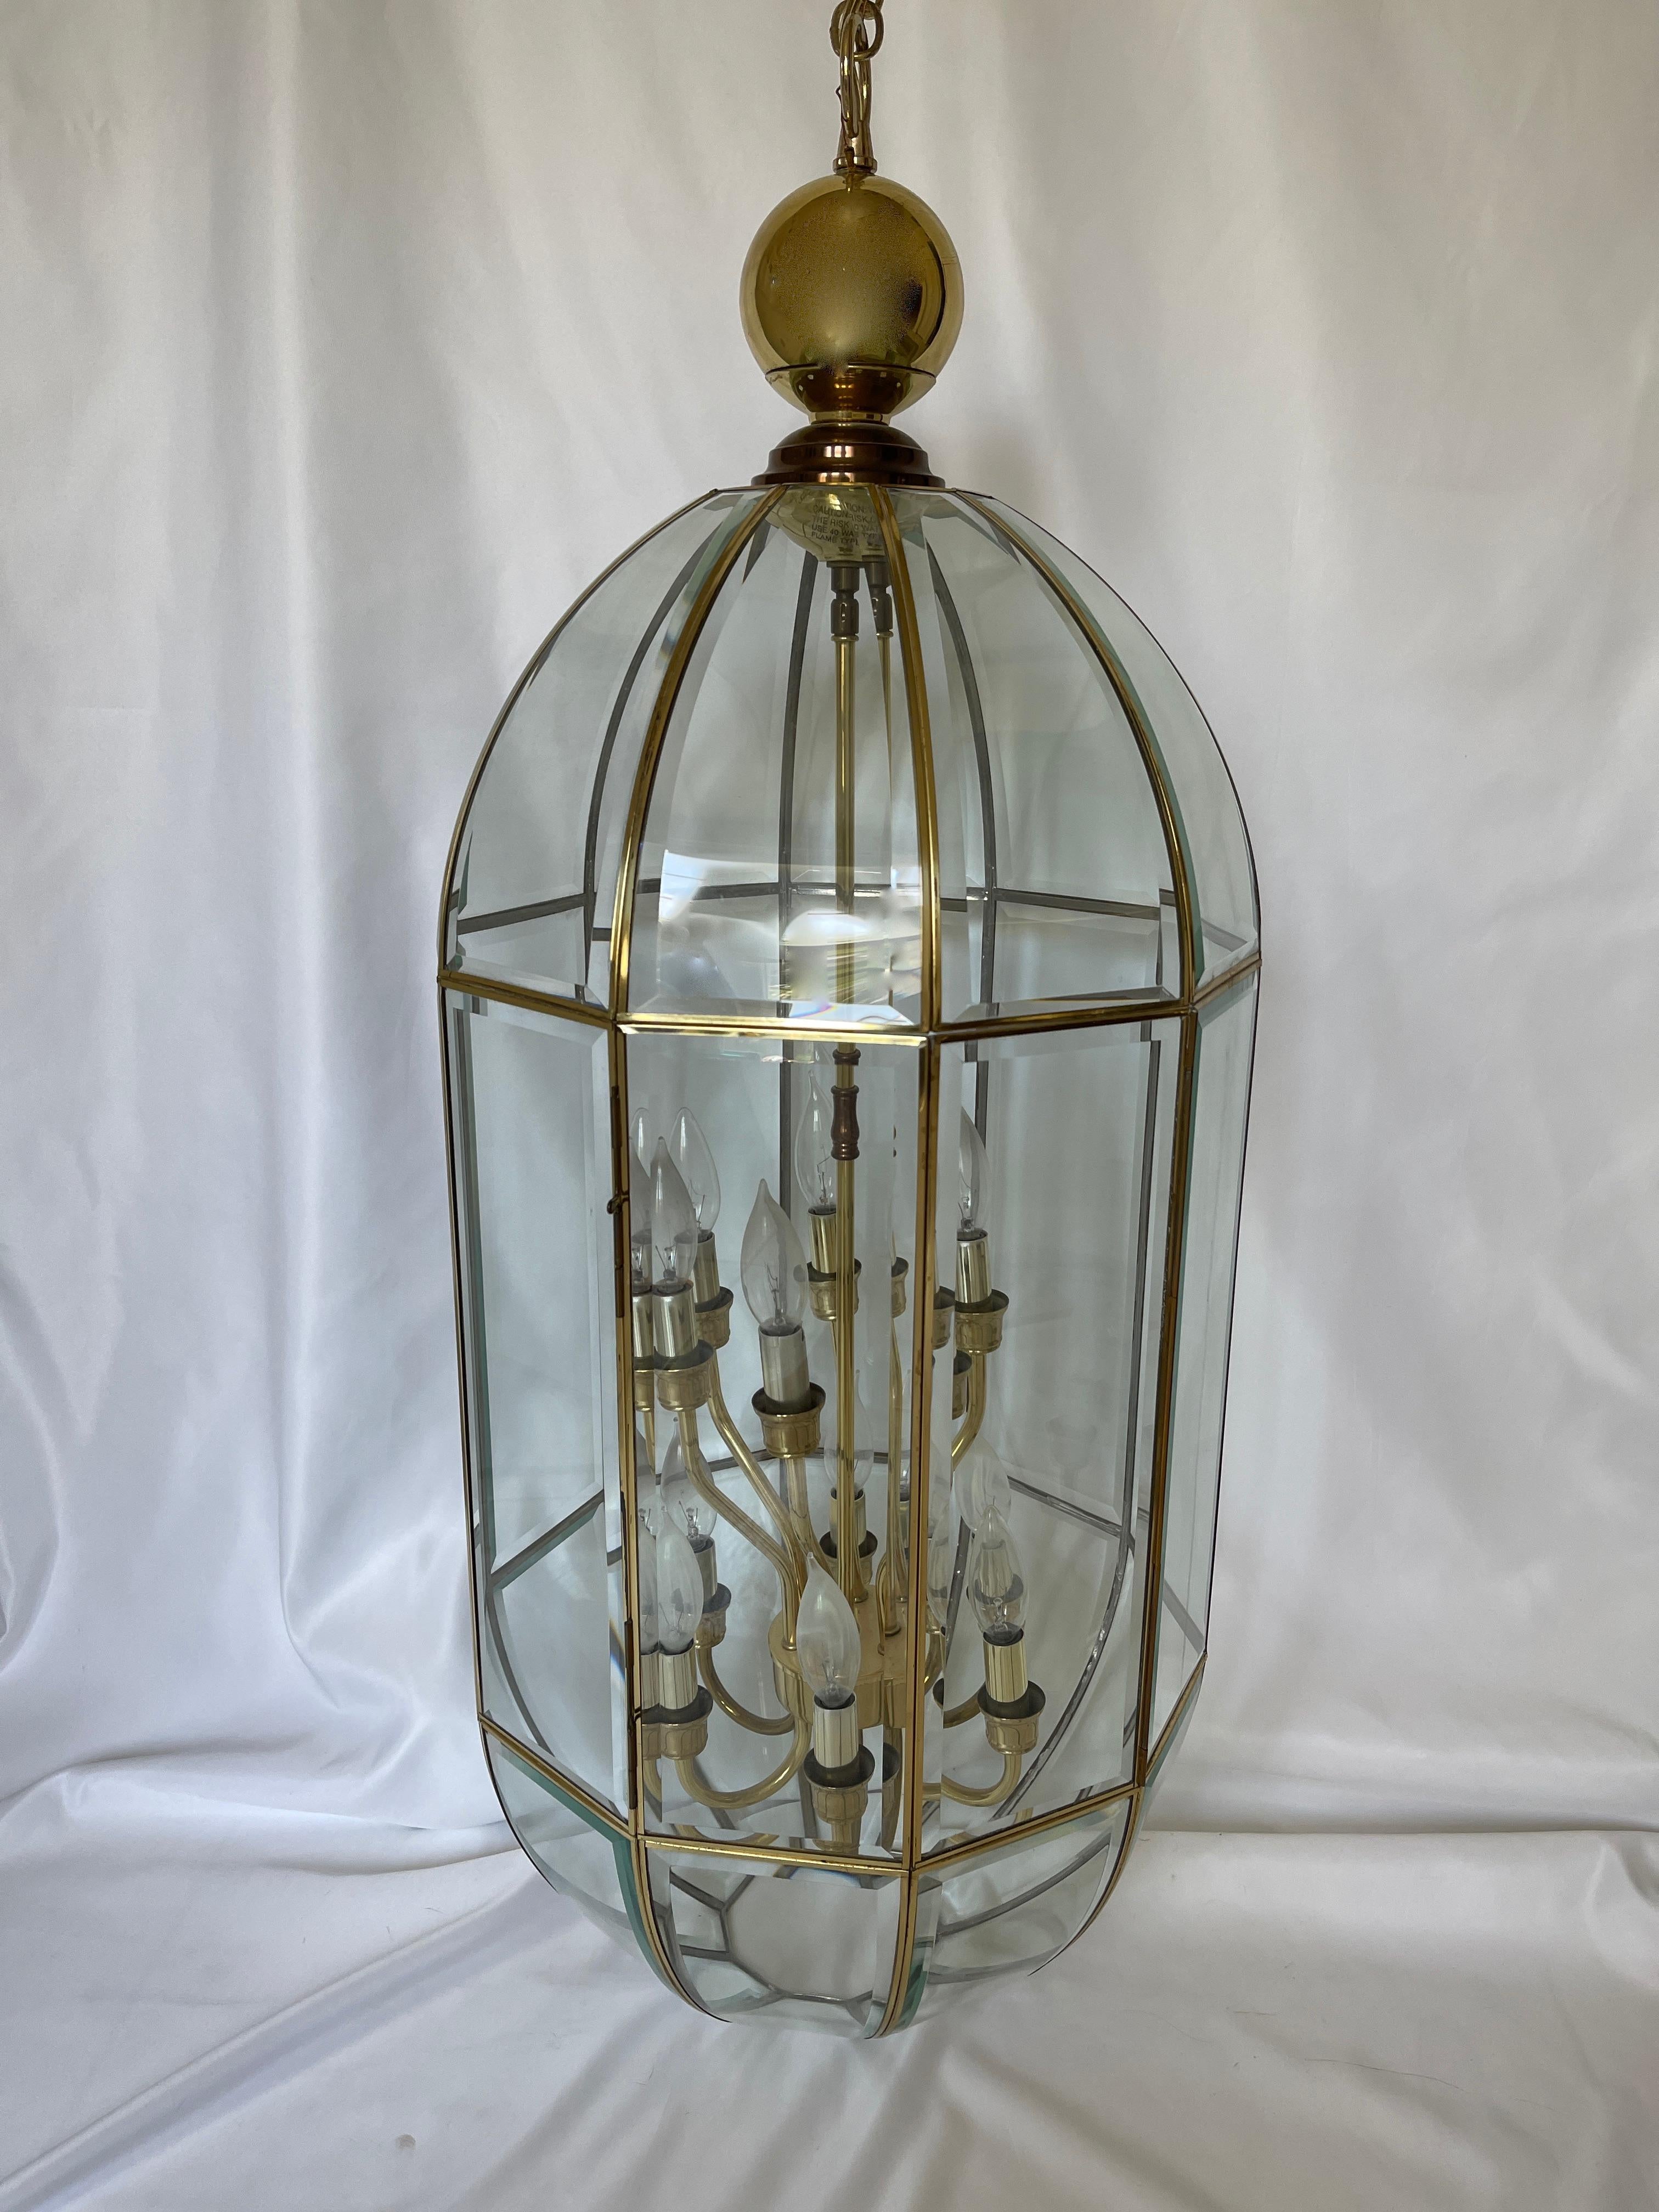 Monumental 1980's polished brass bound beveled glass panel pendant foyer chandelier with interior brass 2 tier candelabra with 12 candlestick lights.
 Lamp body measures 41